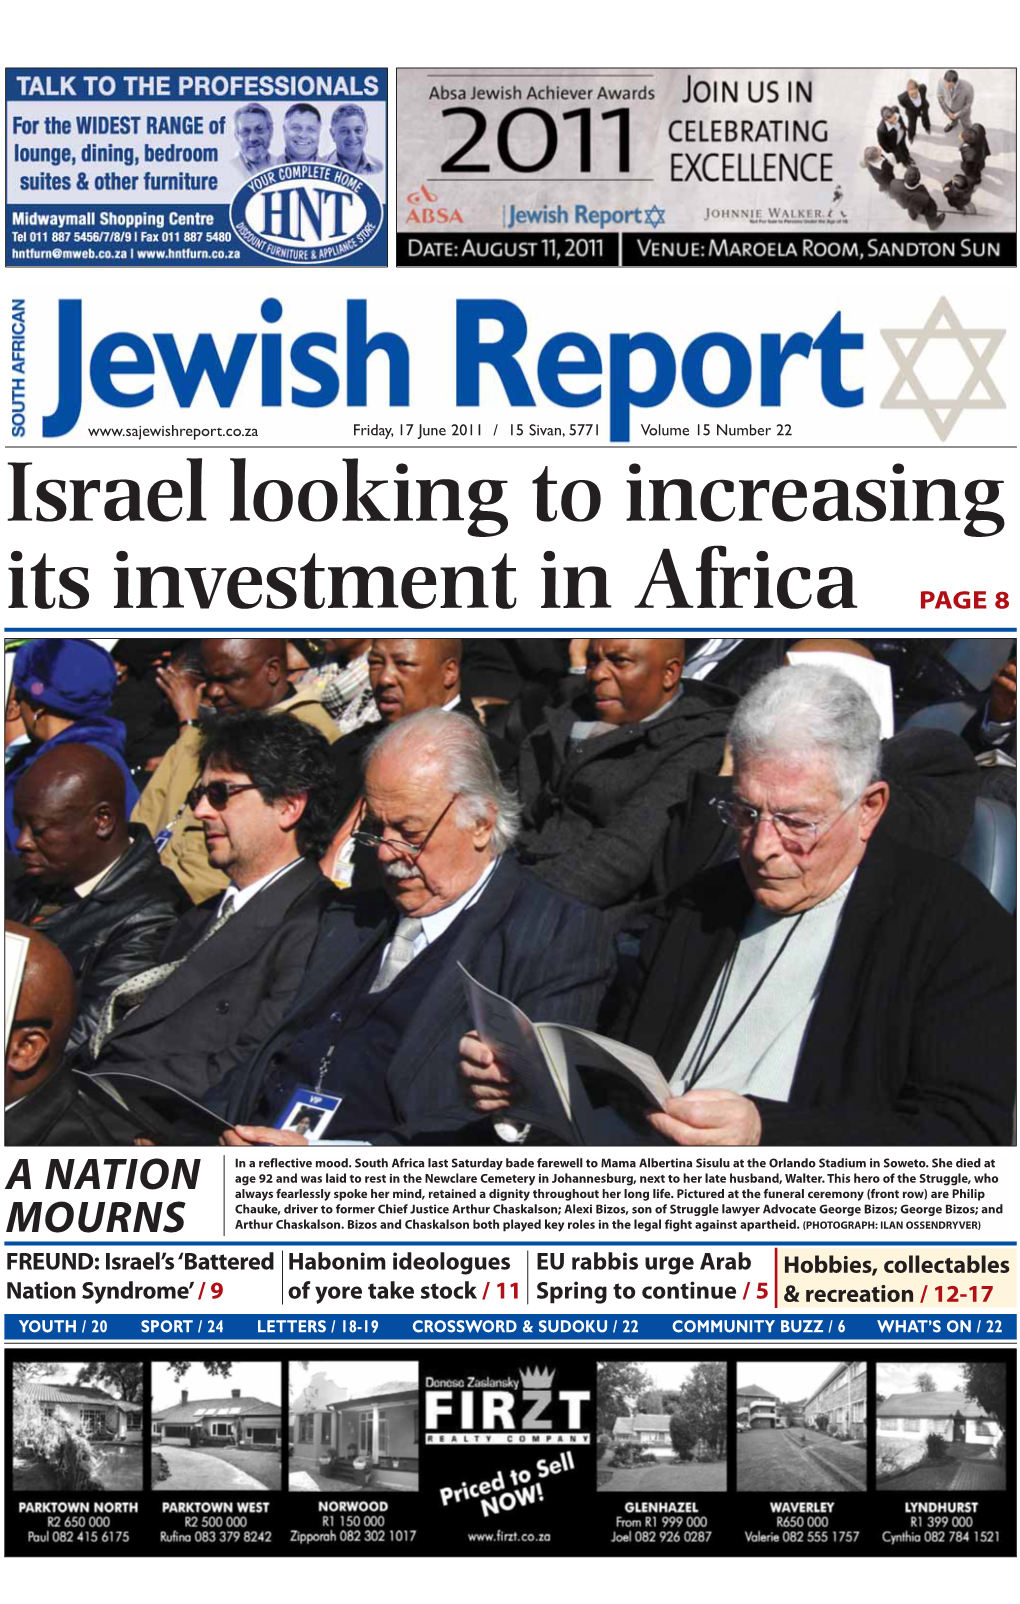 17 June 2011 / 15 Sivan, 5771 Volume 15 Number 22 Israel Looking to Increasing Its Investment in Africa PAGE 8